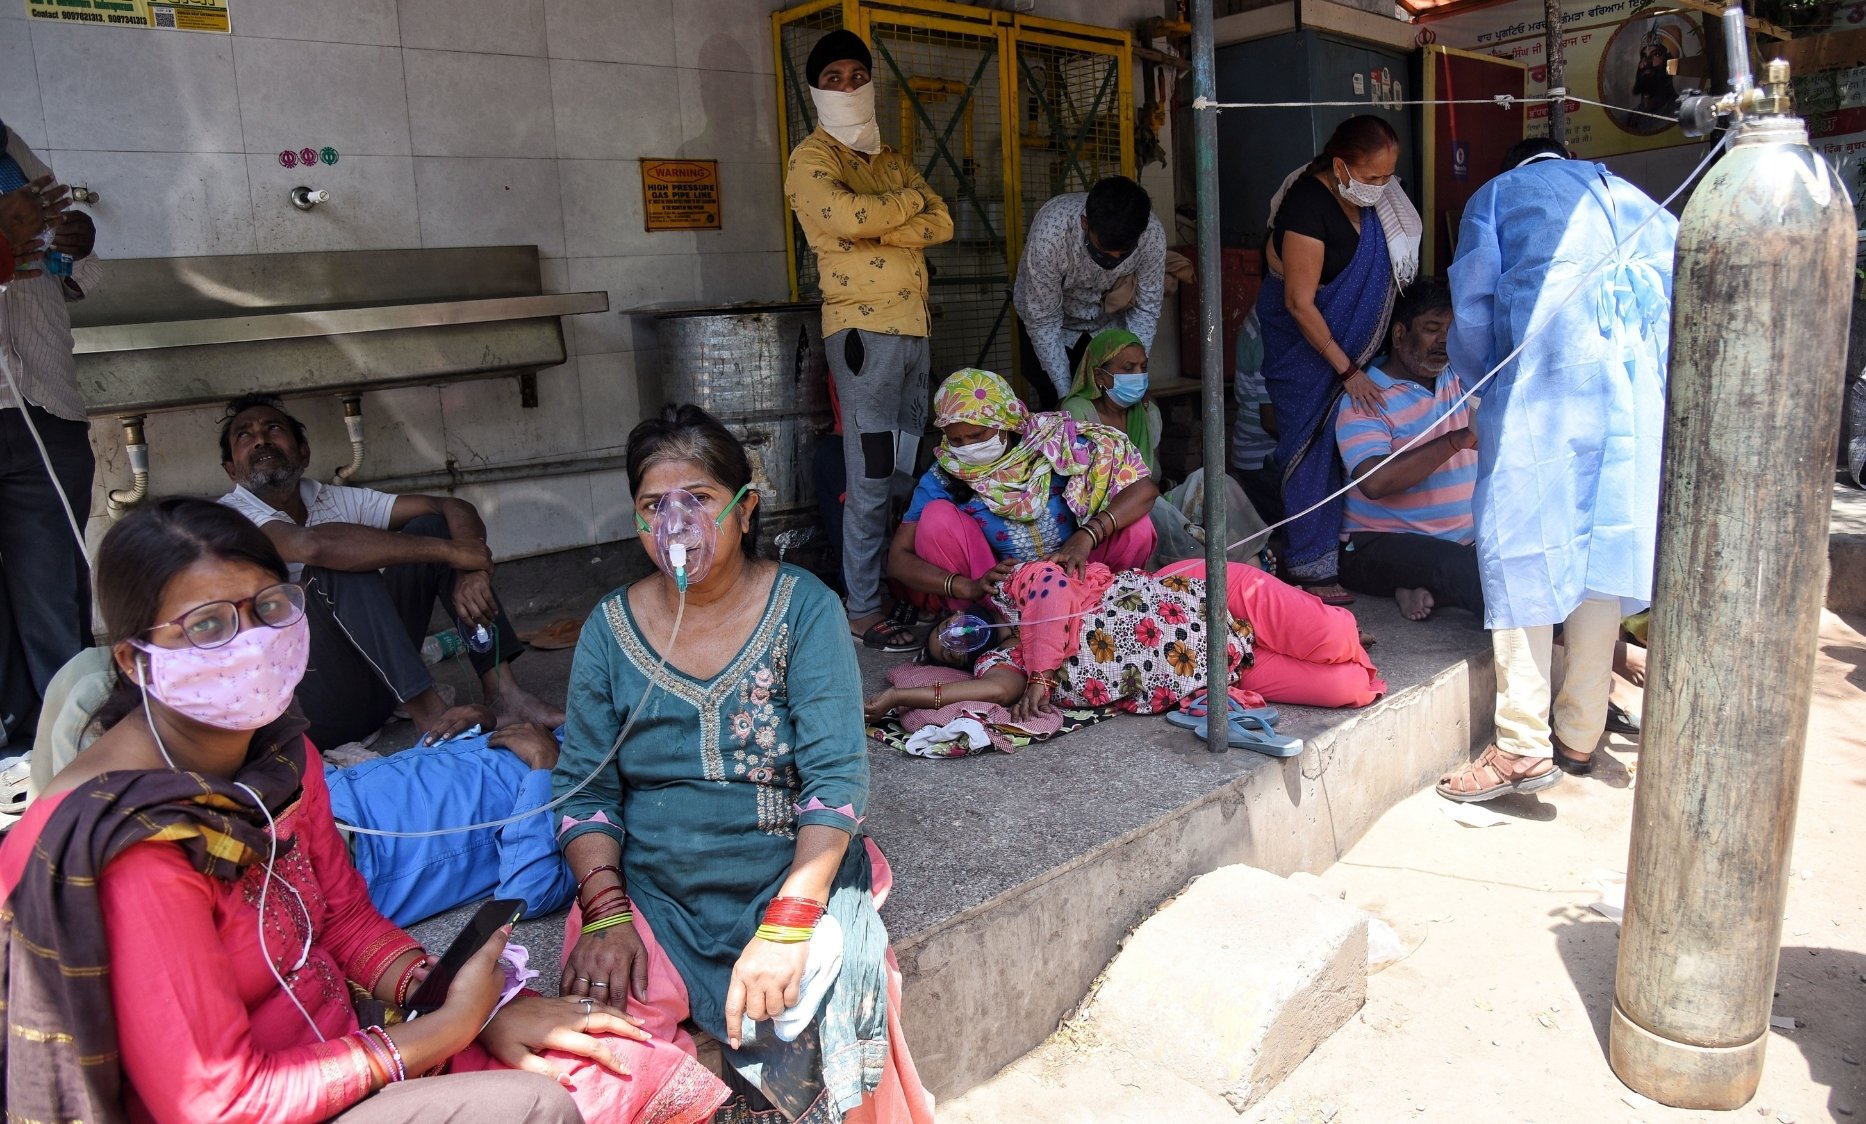 Delhi Hospitals helpless; Undeclared emergency takes country by storm - COVID-19 News - Digpu News